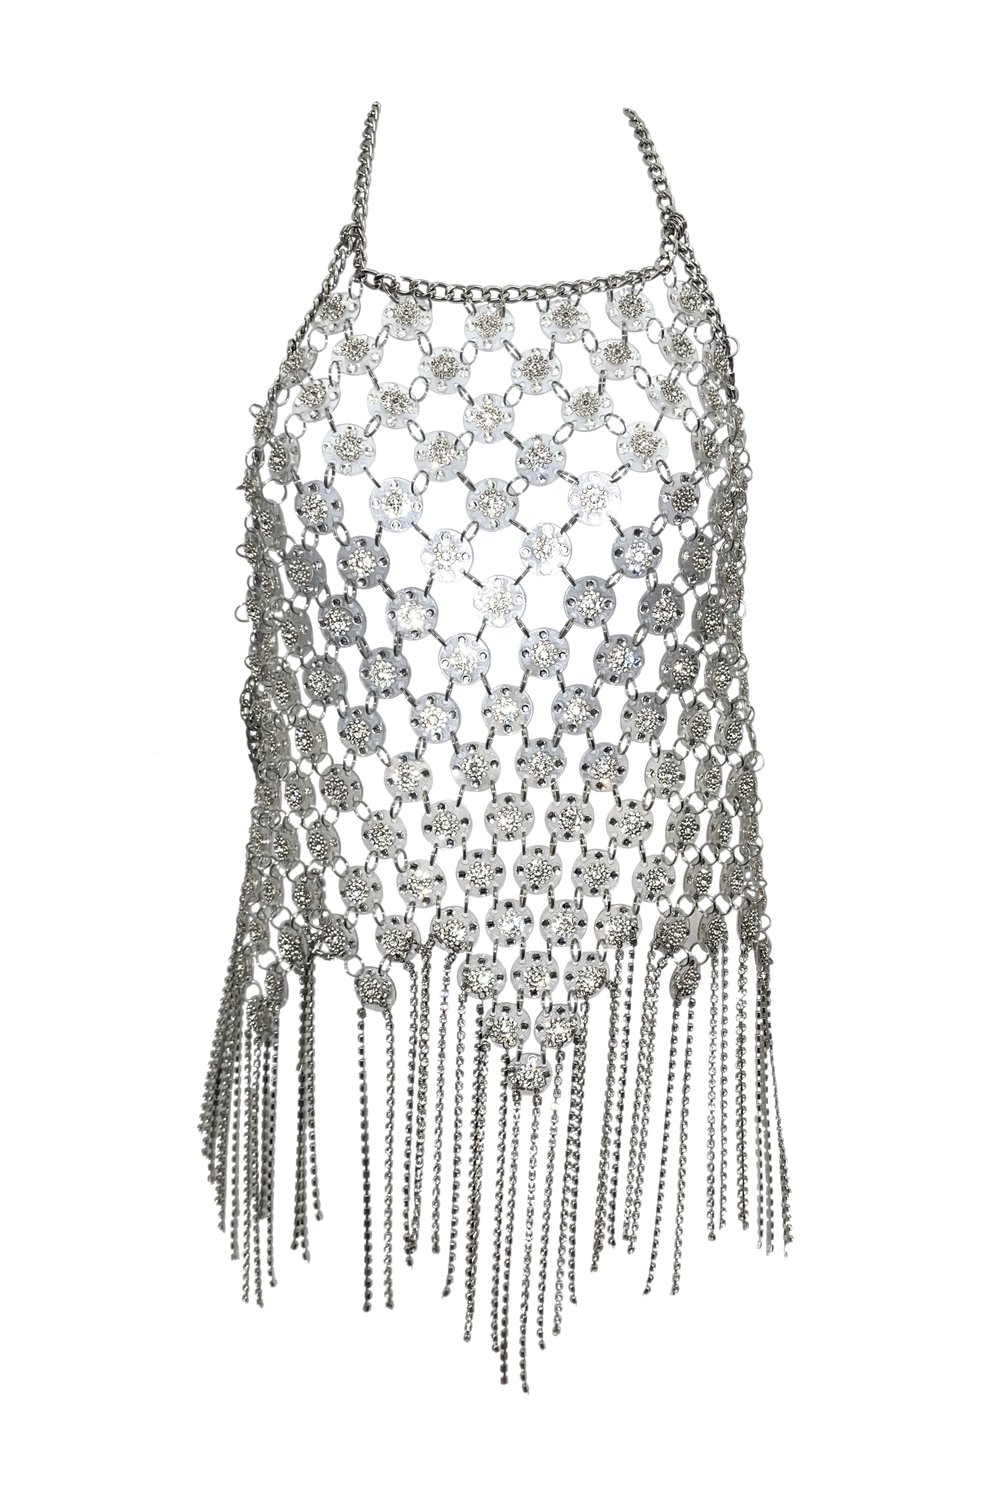 shop all collections - MADE TO ORDER - DIAPHANOUS plexi rhinestone  chainmail top - KELSEY RANDALL